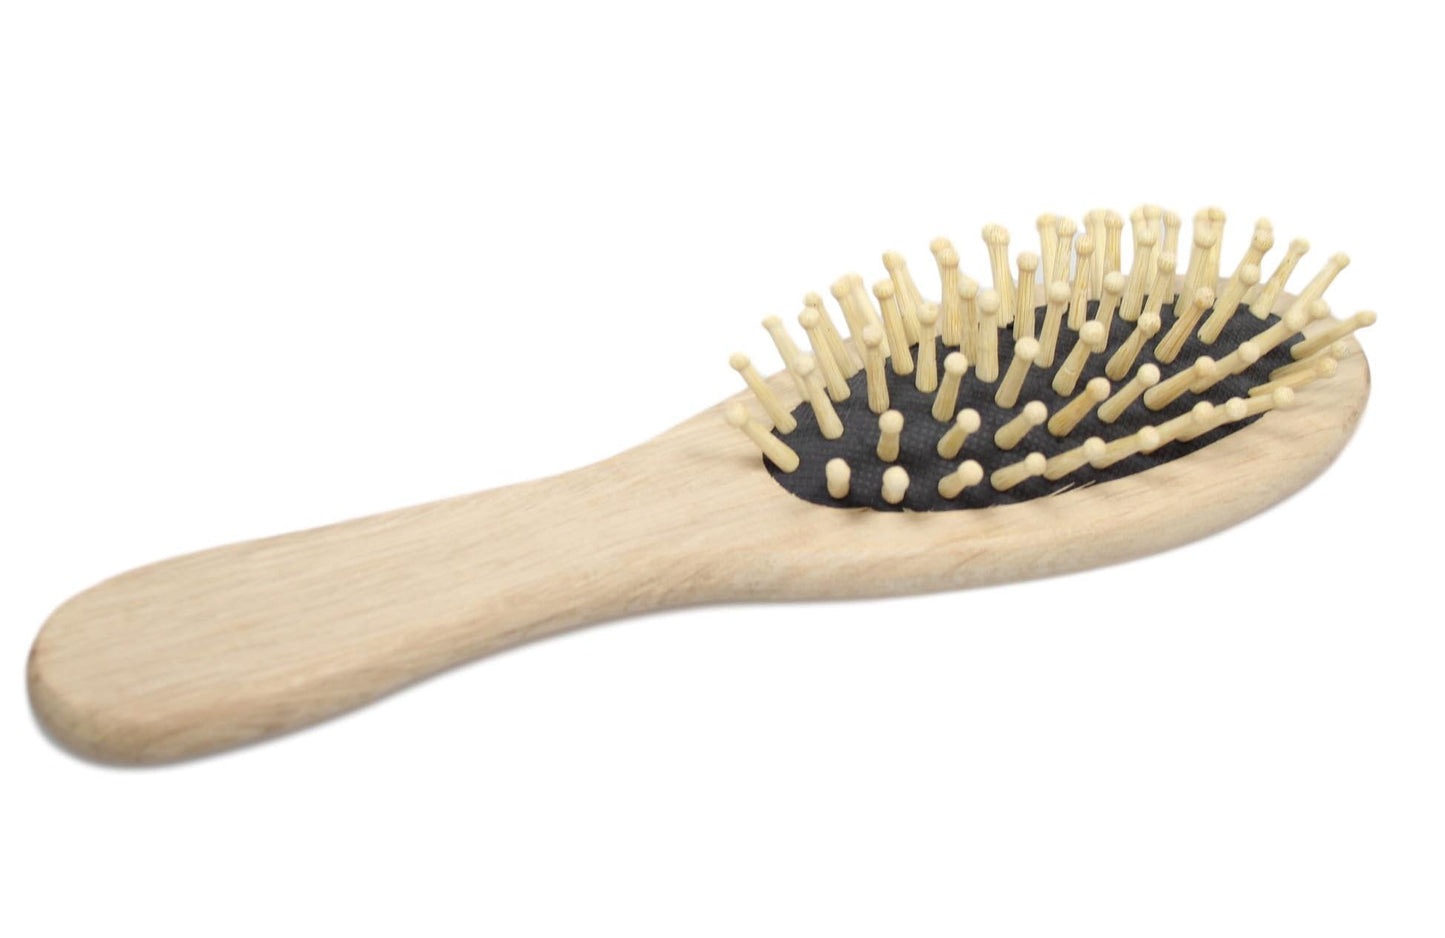 Wooden Comb Hair Styling Brush Paddle Hair Care Scalp Styling Brush Comb 22cm 5229 (Parcel Rate)